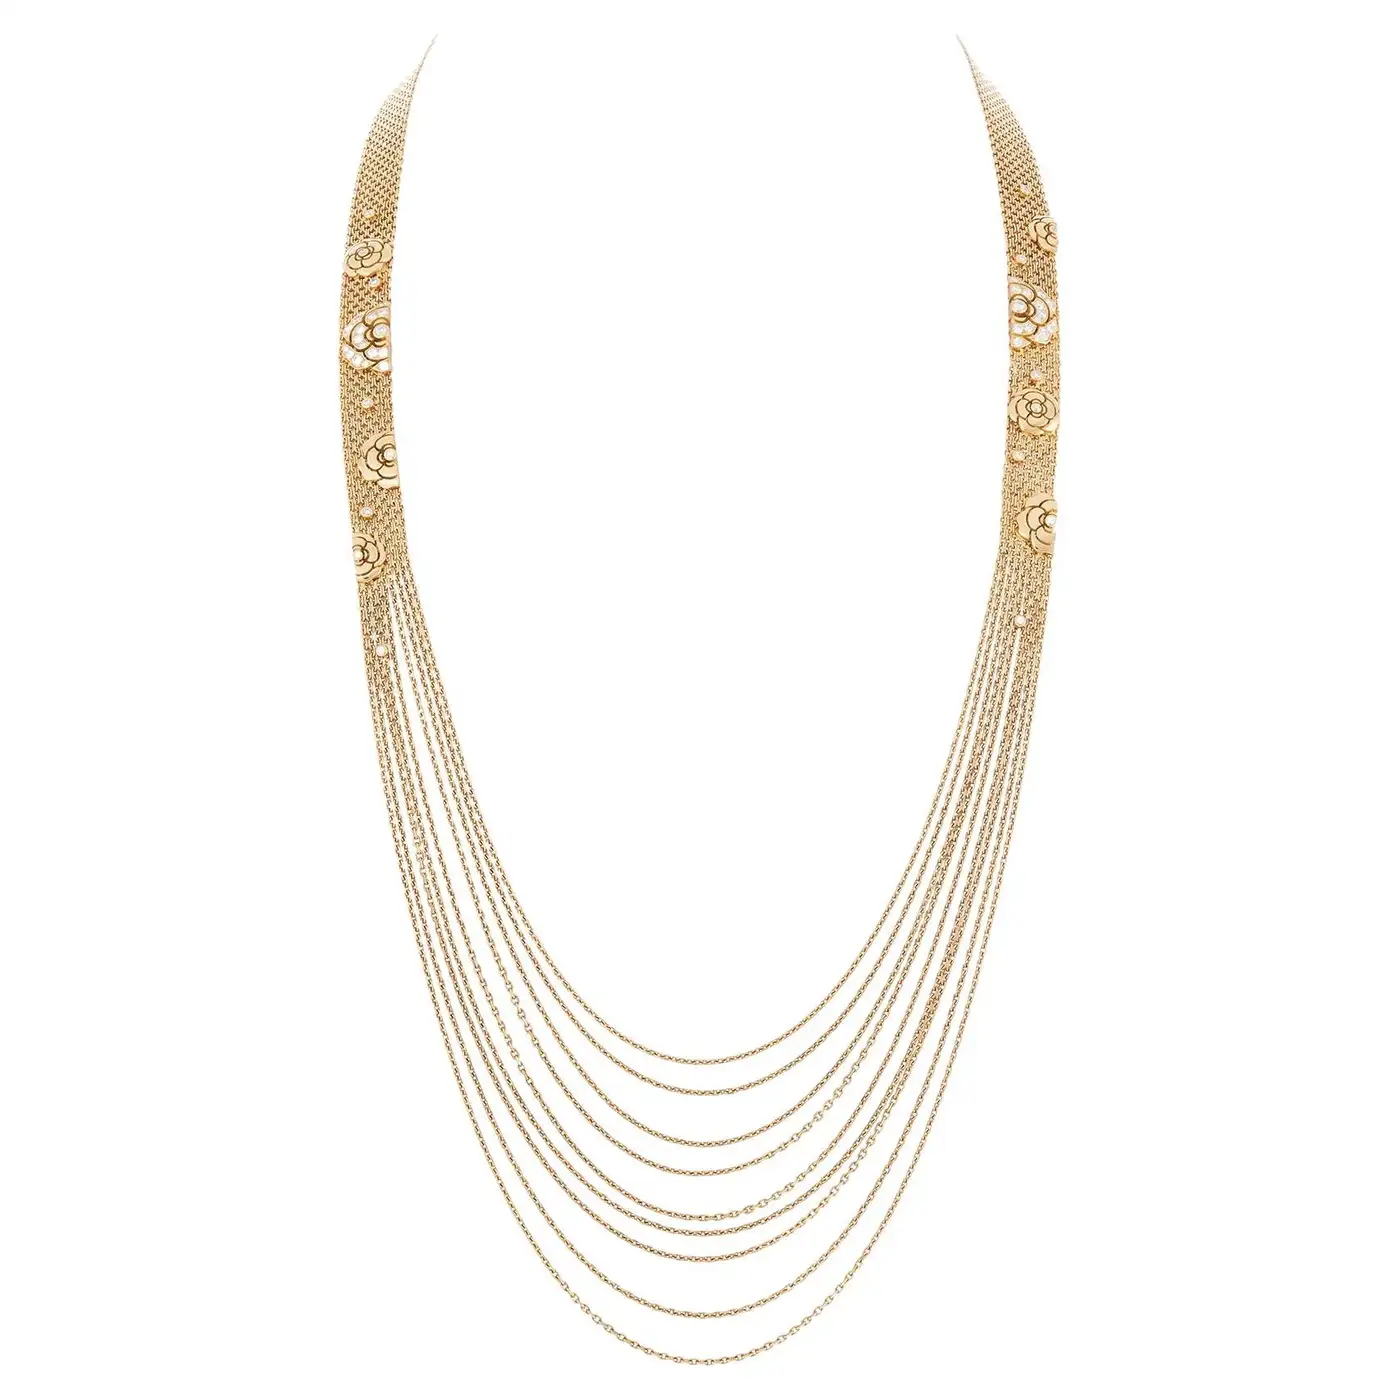 Chanel-Gold-and-Diamond-Camellia-Multi-Strand-Flapper-Necklace-7.webp